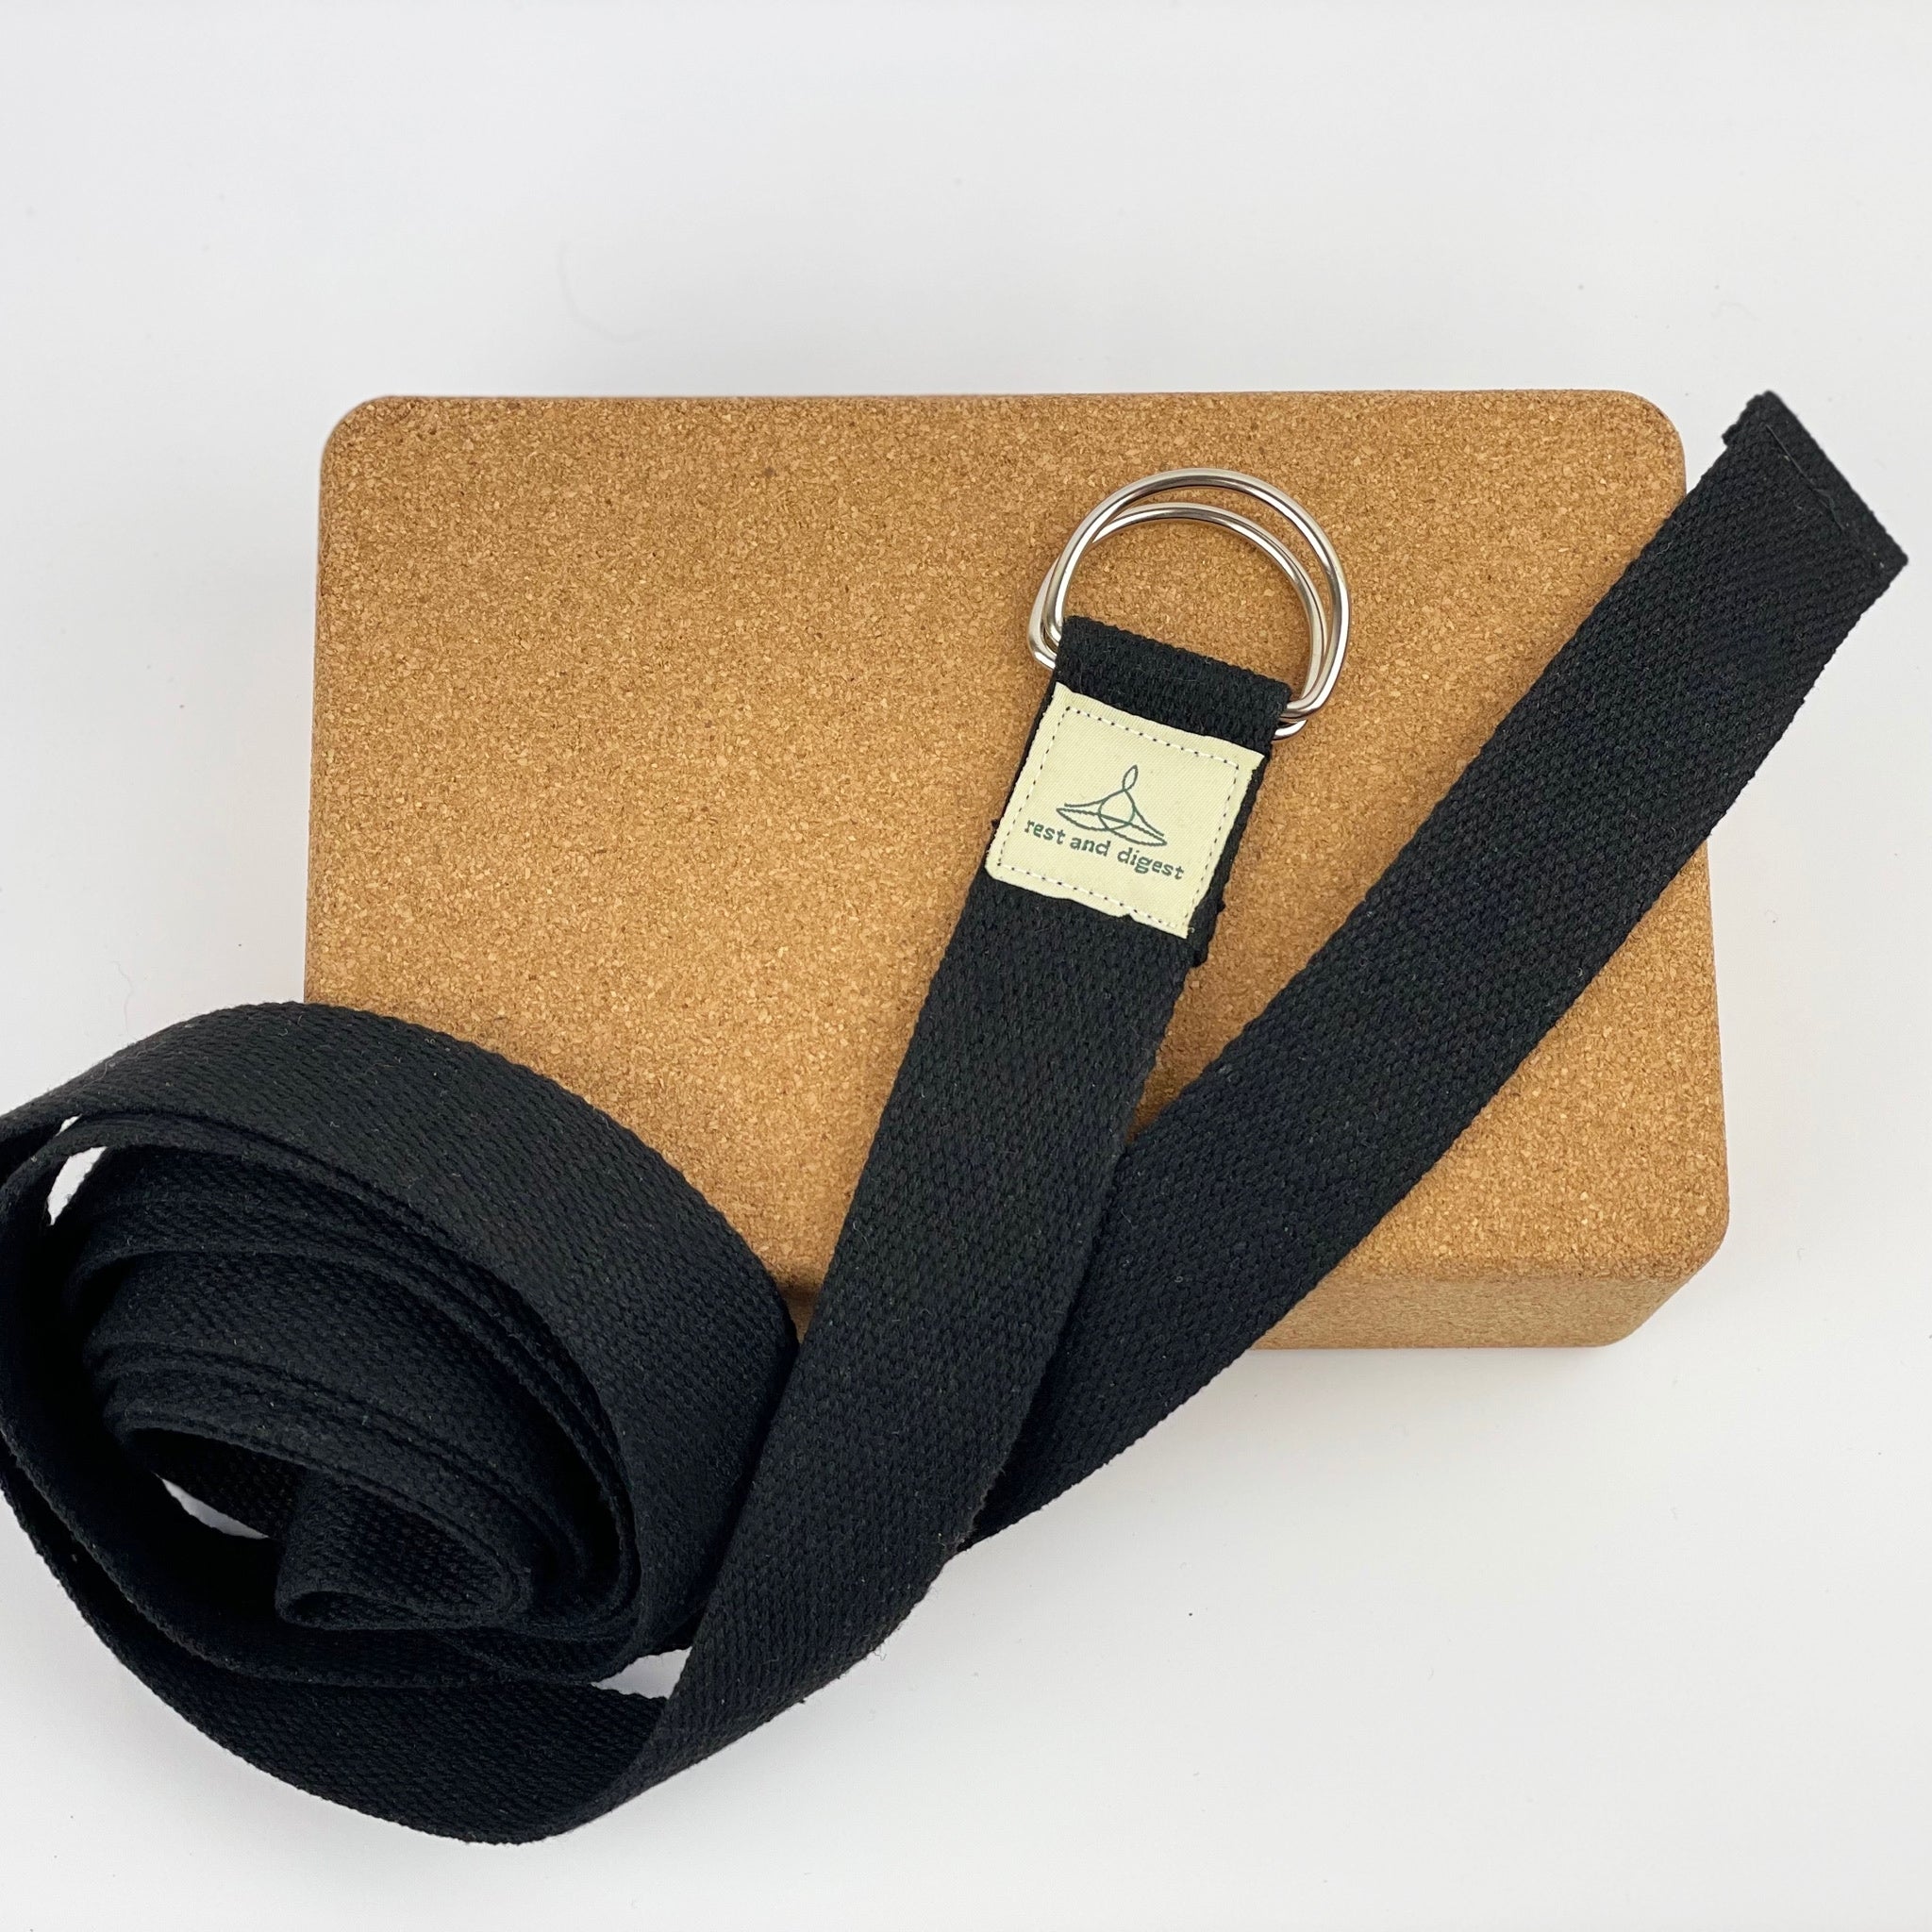 Rest and Digest Extra Long Stretch Strap